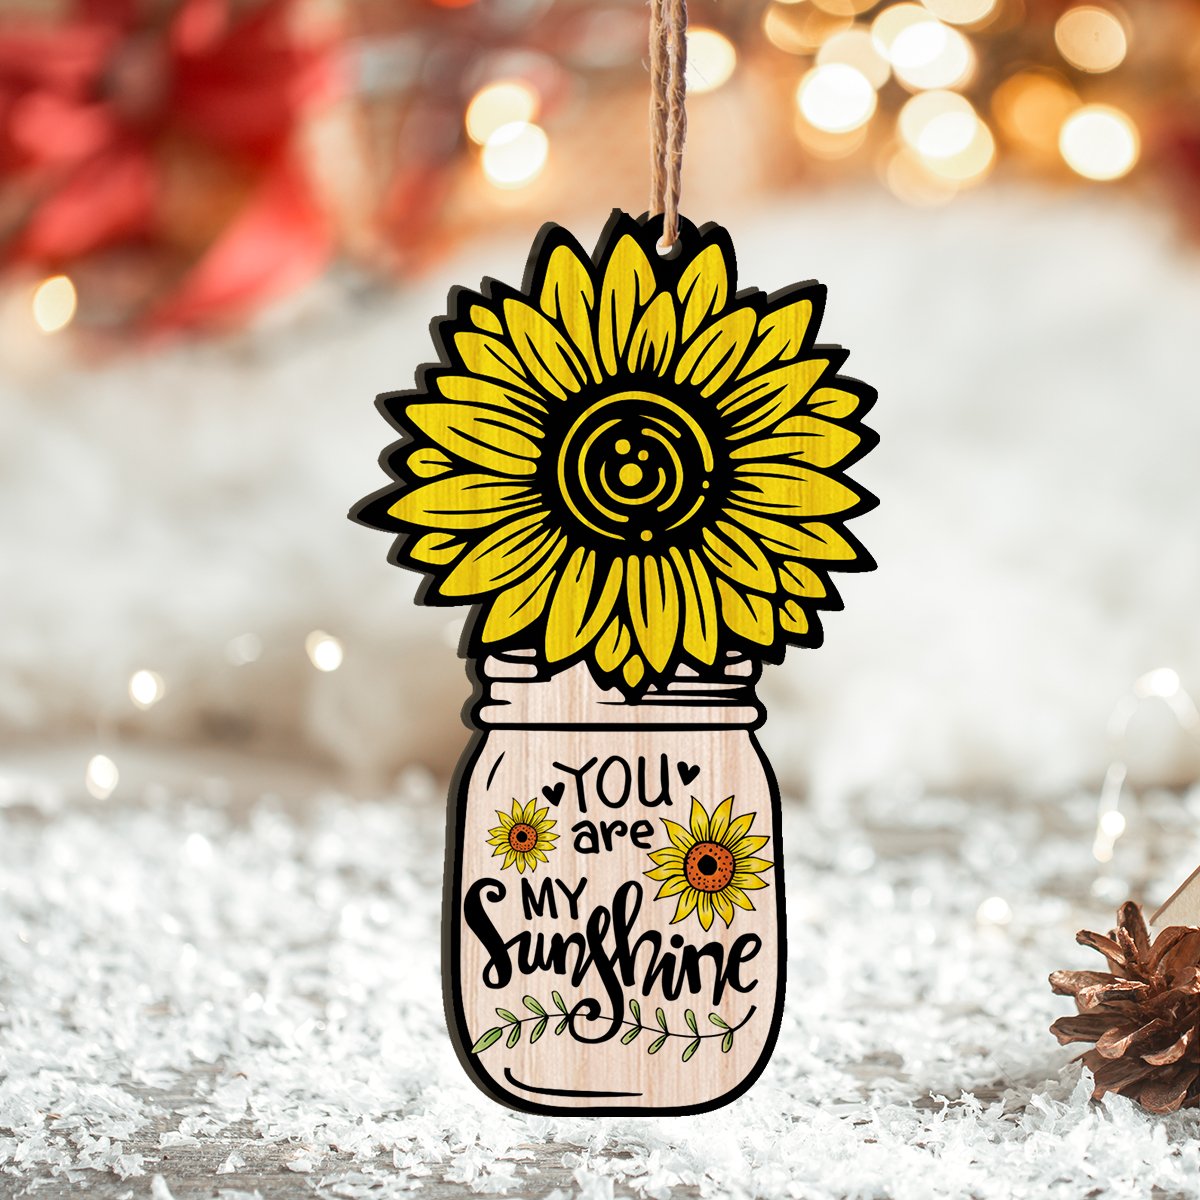 You Are My Sunshine Personalizedwitch Printed Wood Christmas Ornament